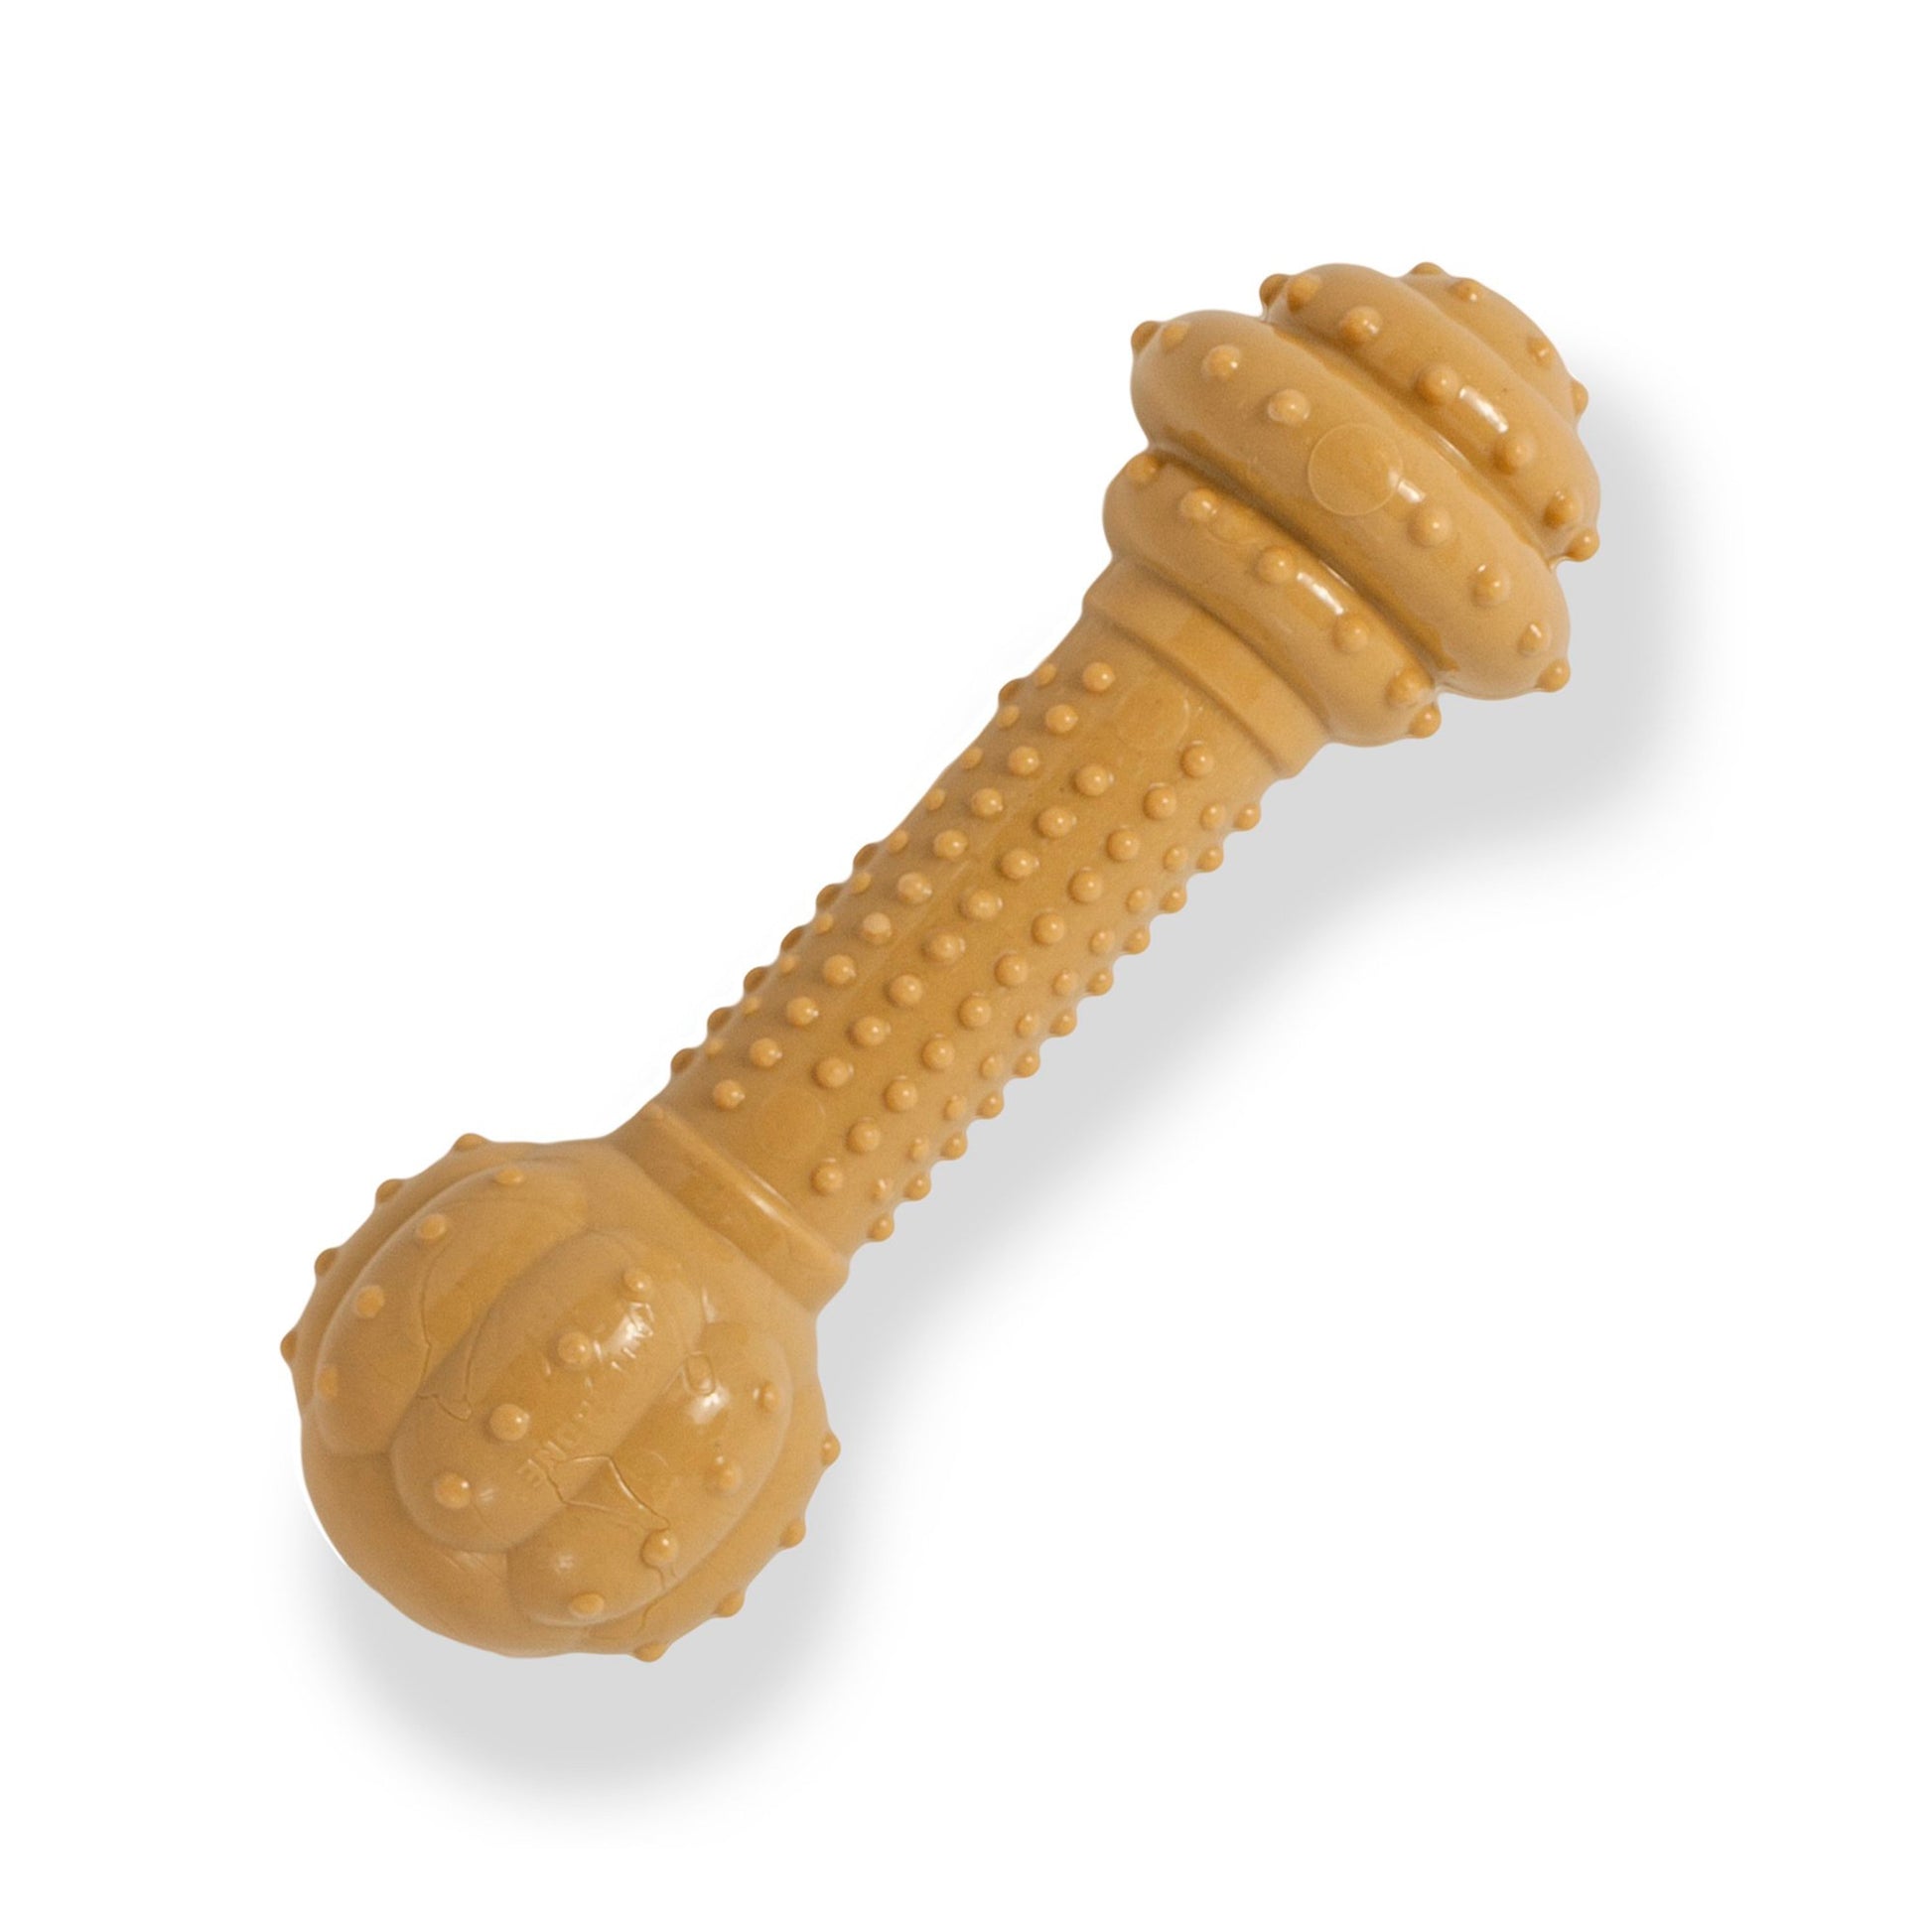 Nylabone Barbell Power Chew Durable Dog Toy Peanut Butter Flavor Large/Giant - Up To 50 lb, Nylabone